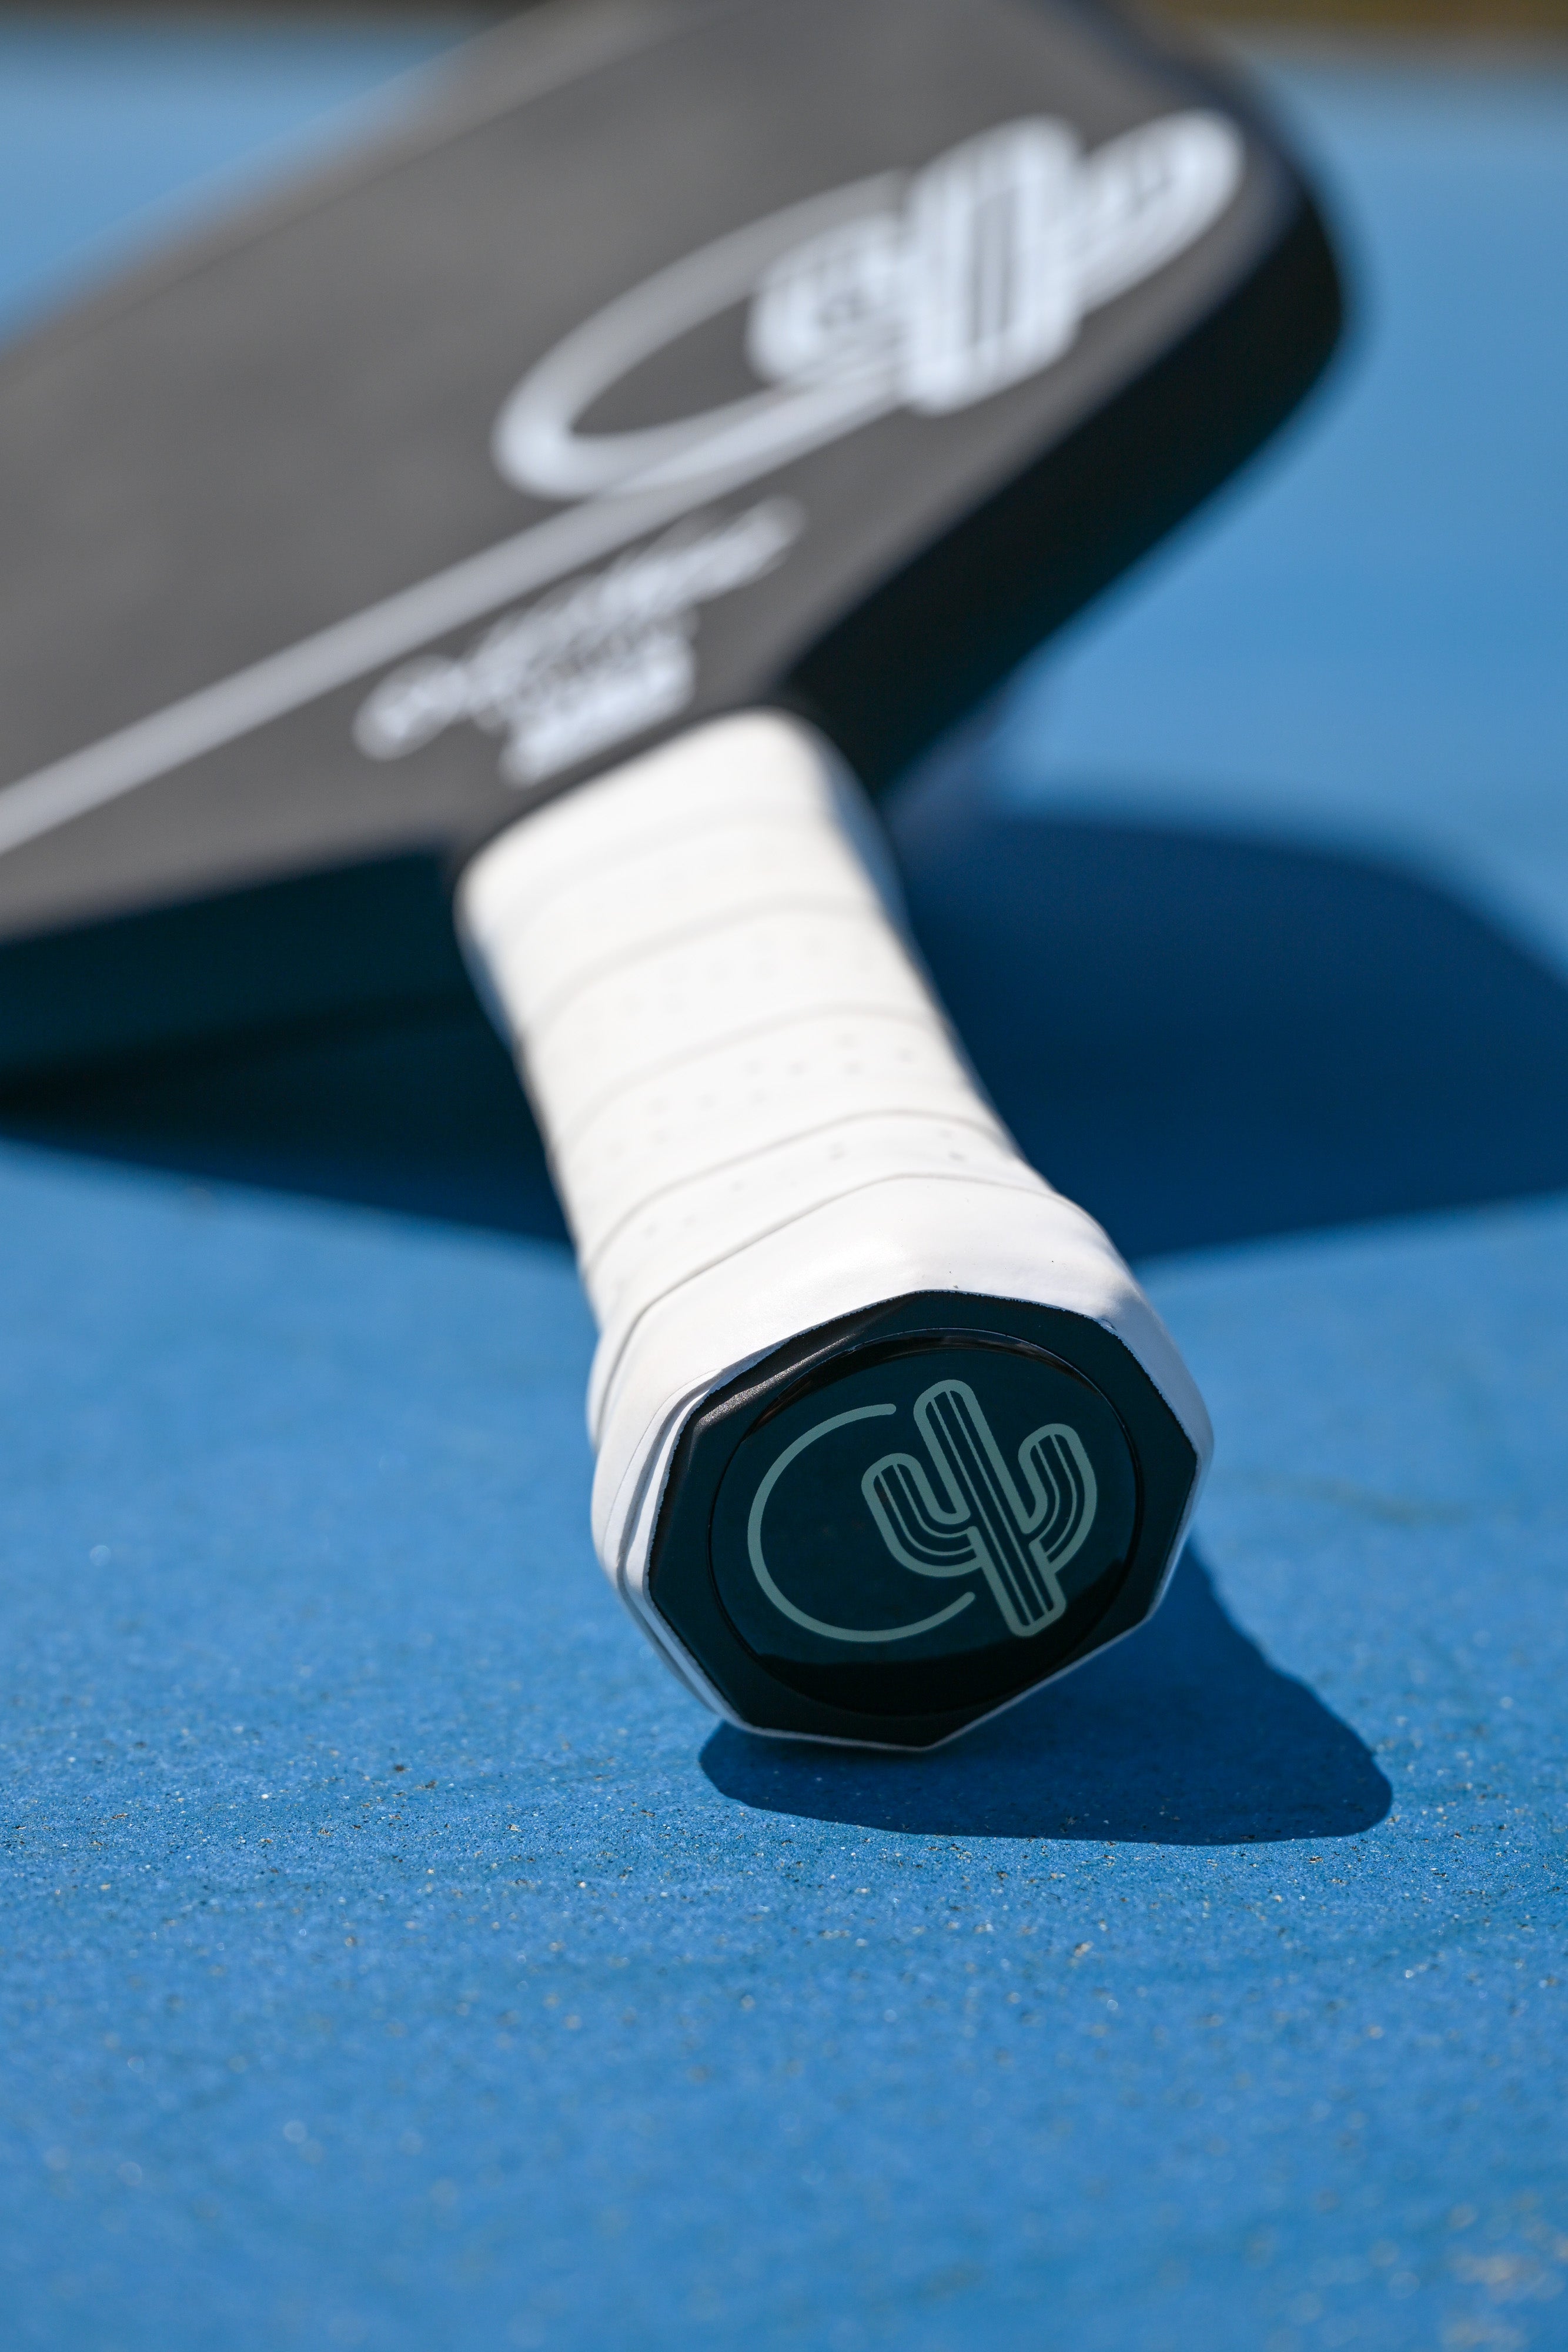 OutWest Sport Professional Pickleball Paddle - The Pro, USAPA Approved